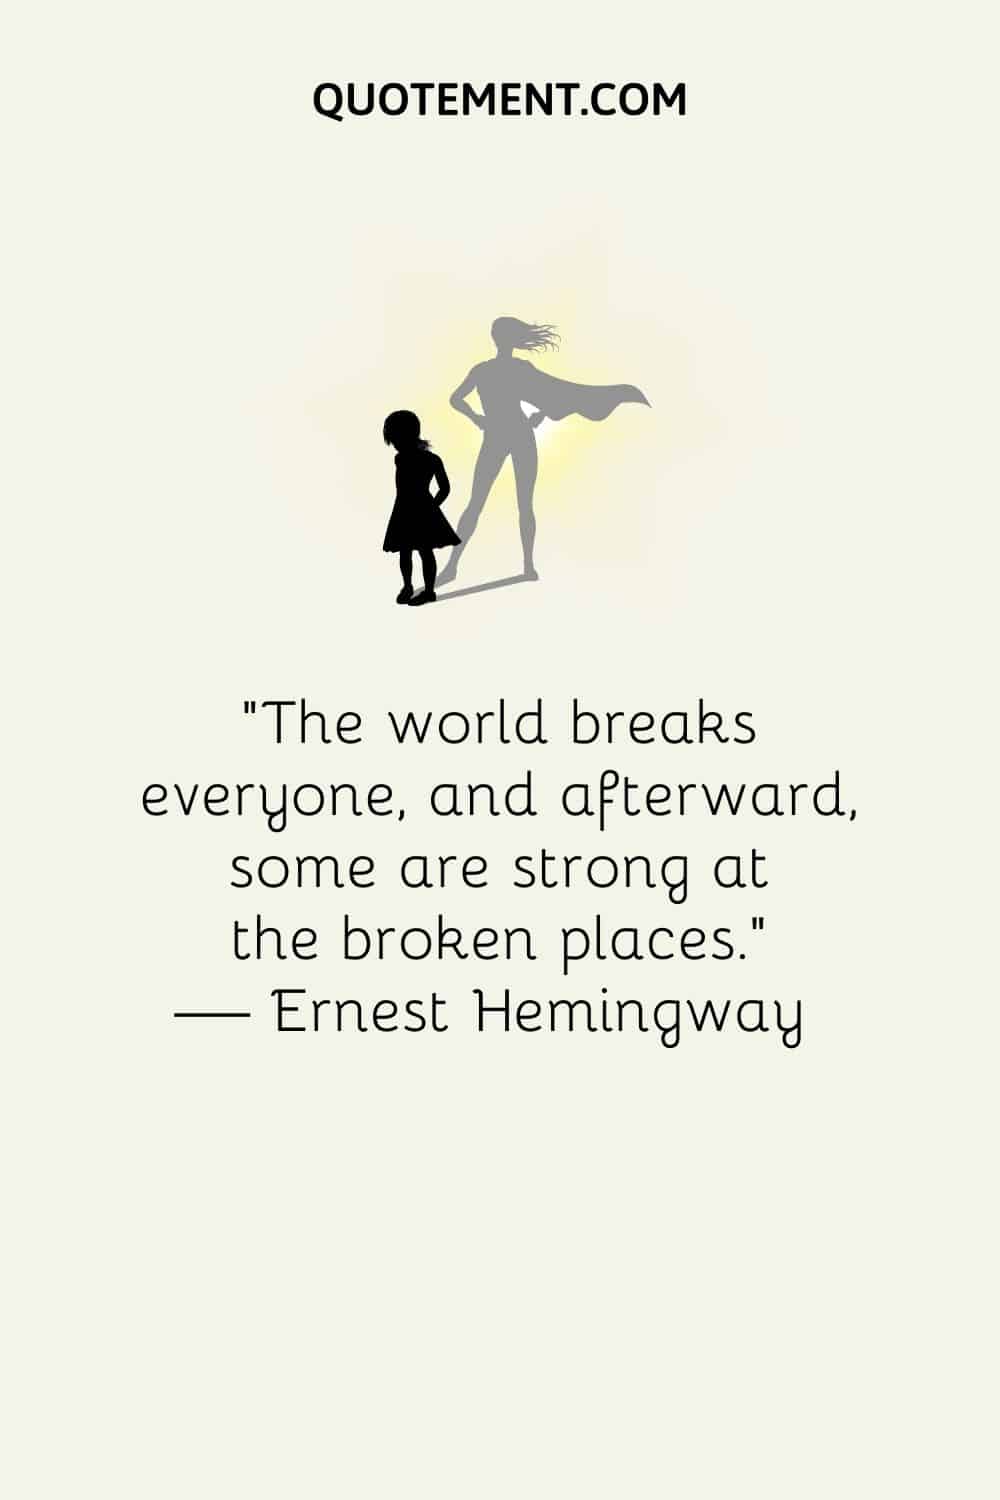 “The world breaks everyone, and afterward, some are strong at the broken places.” — Ernest Hemingway